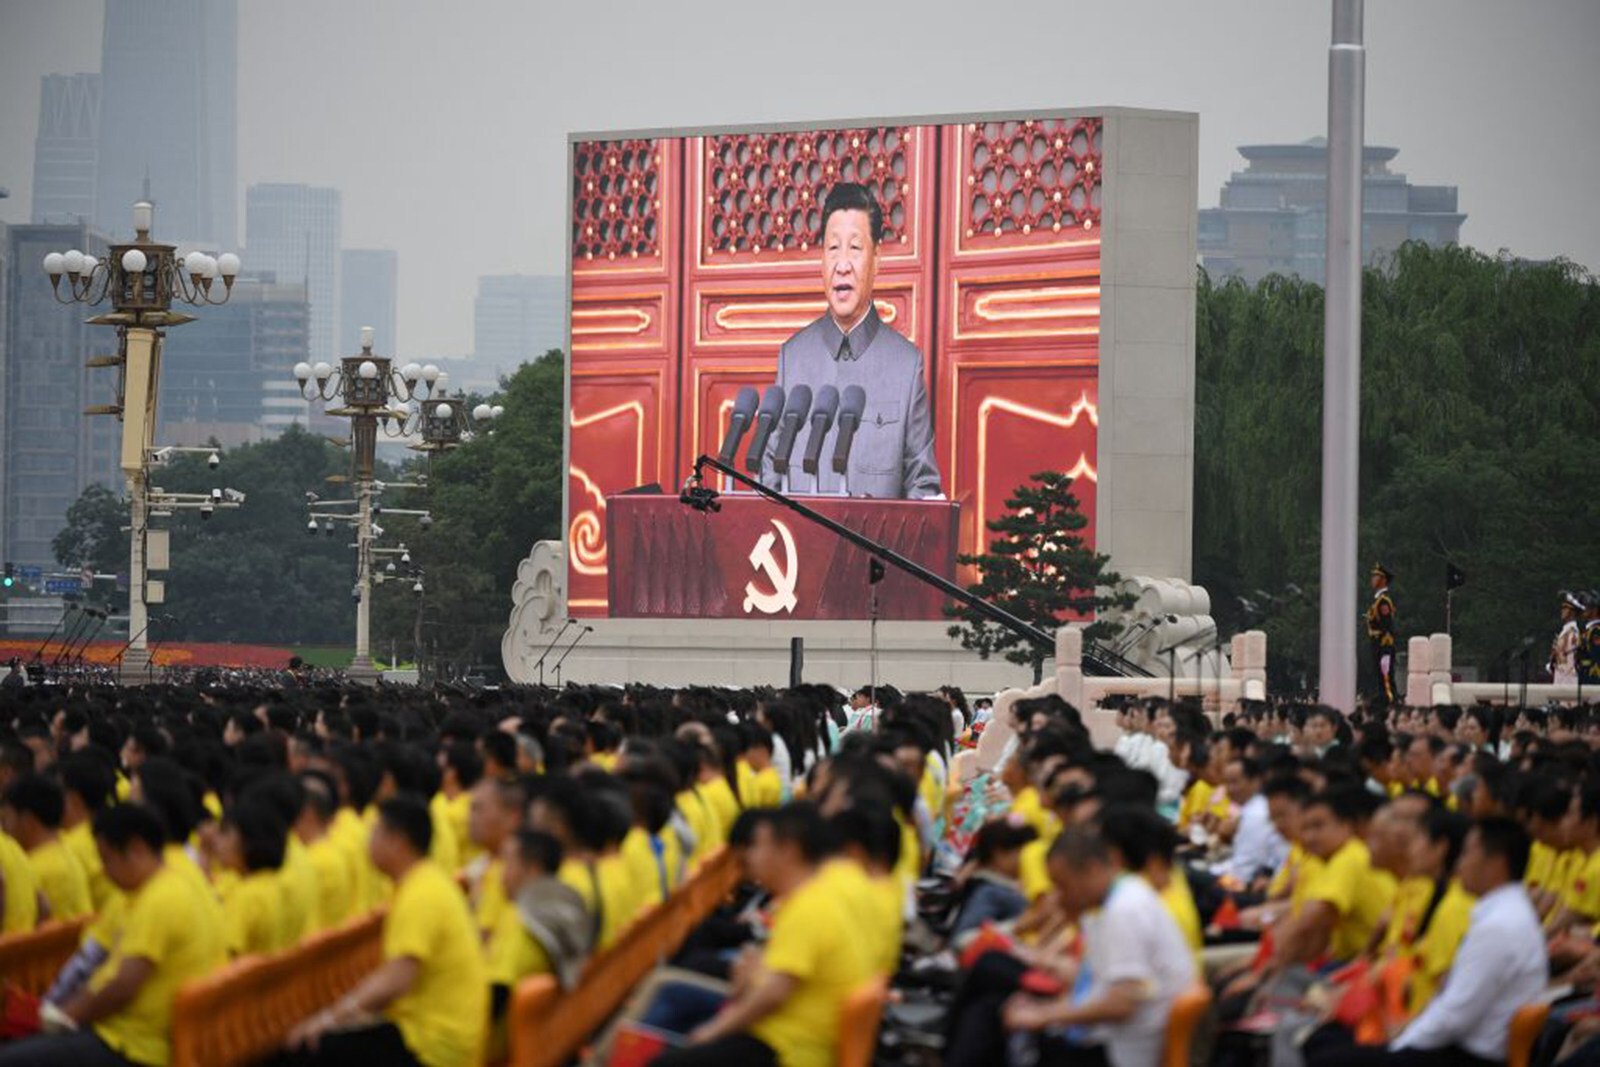 Chinese President Xi Jinping’s speech is shown on a screen in Tiananmen Square in Beijing on July 1, the 100th anniversary of the founding of the Communist Party. Modernity with Chinese characteristics has something old, something new, and something borrowed. Photo: TNS